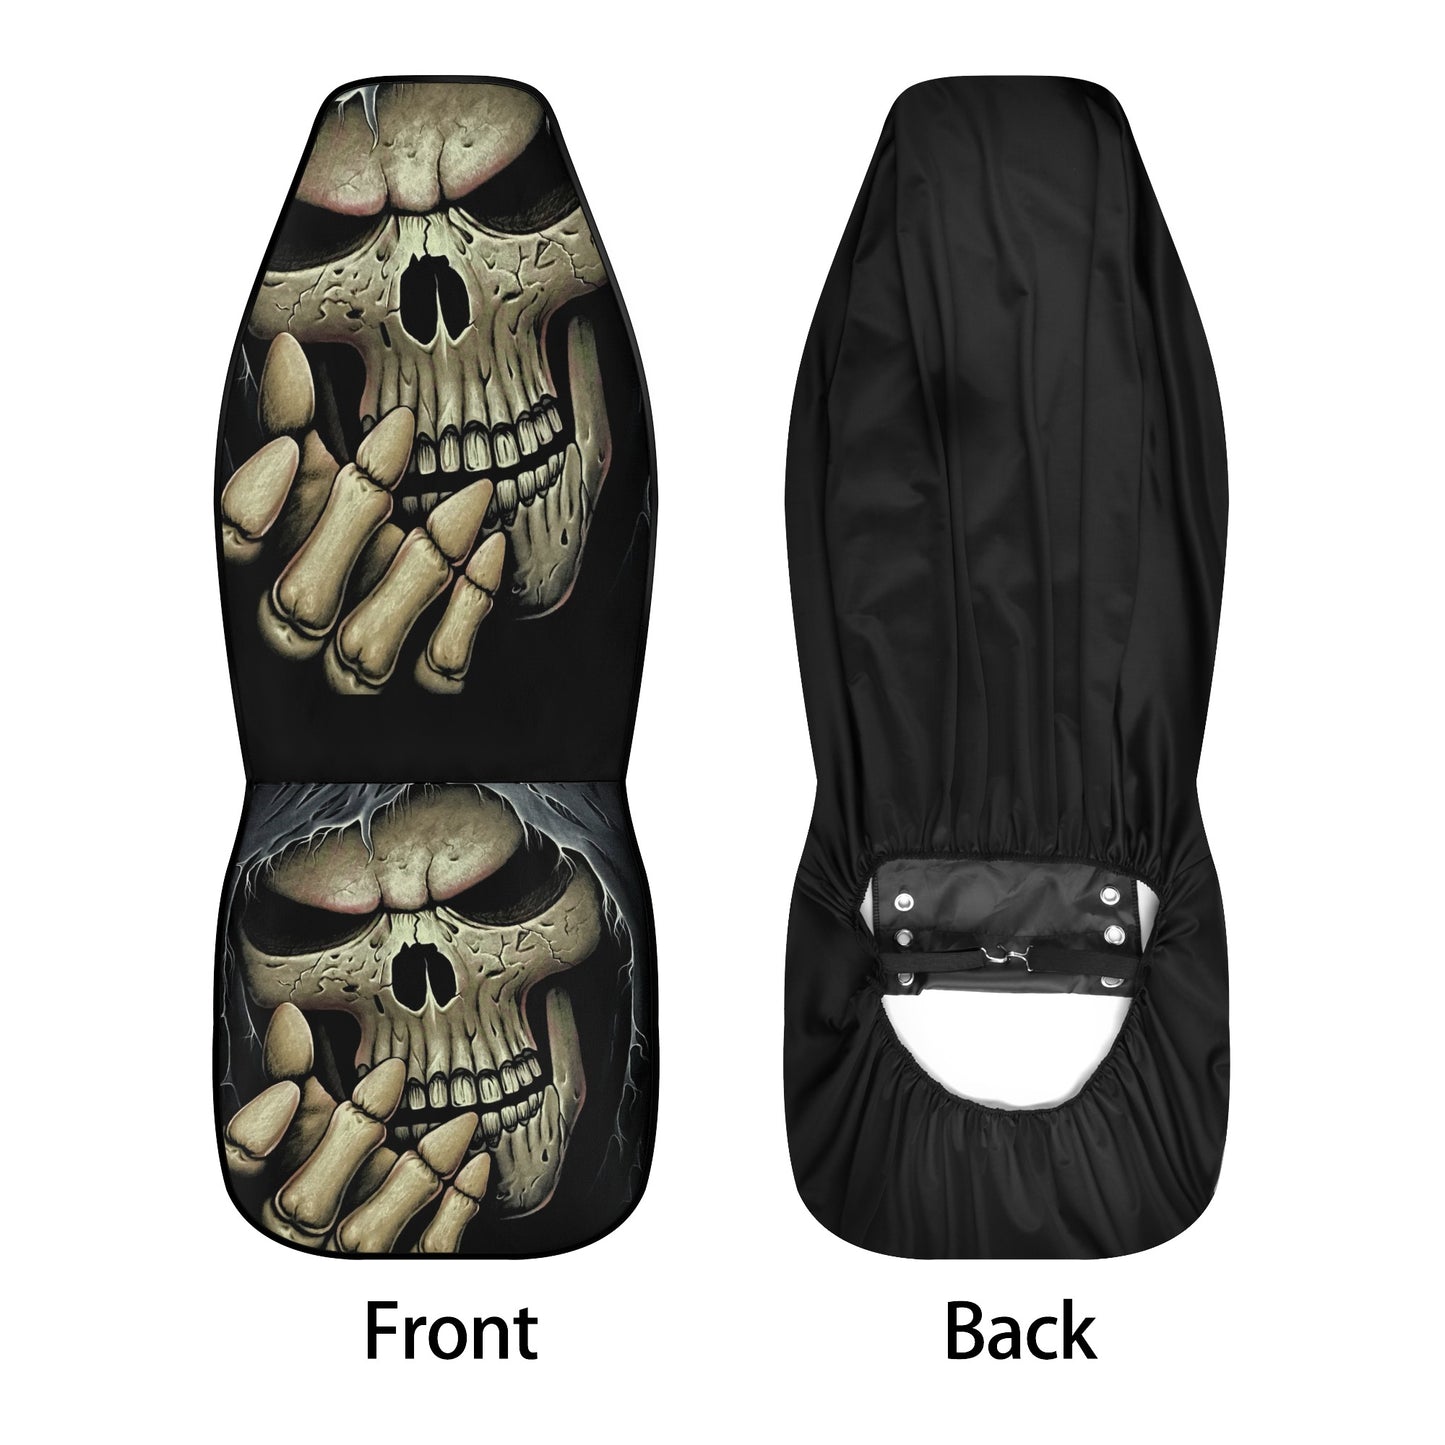 Death skull car seat protector, christmas skull rug mat for car, gothic skull seat cover for car, floral skull washable car seat covers, fla